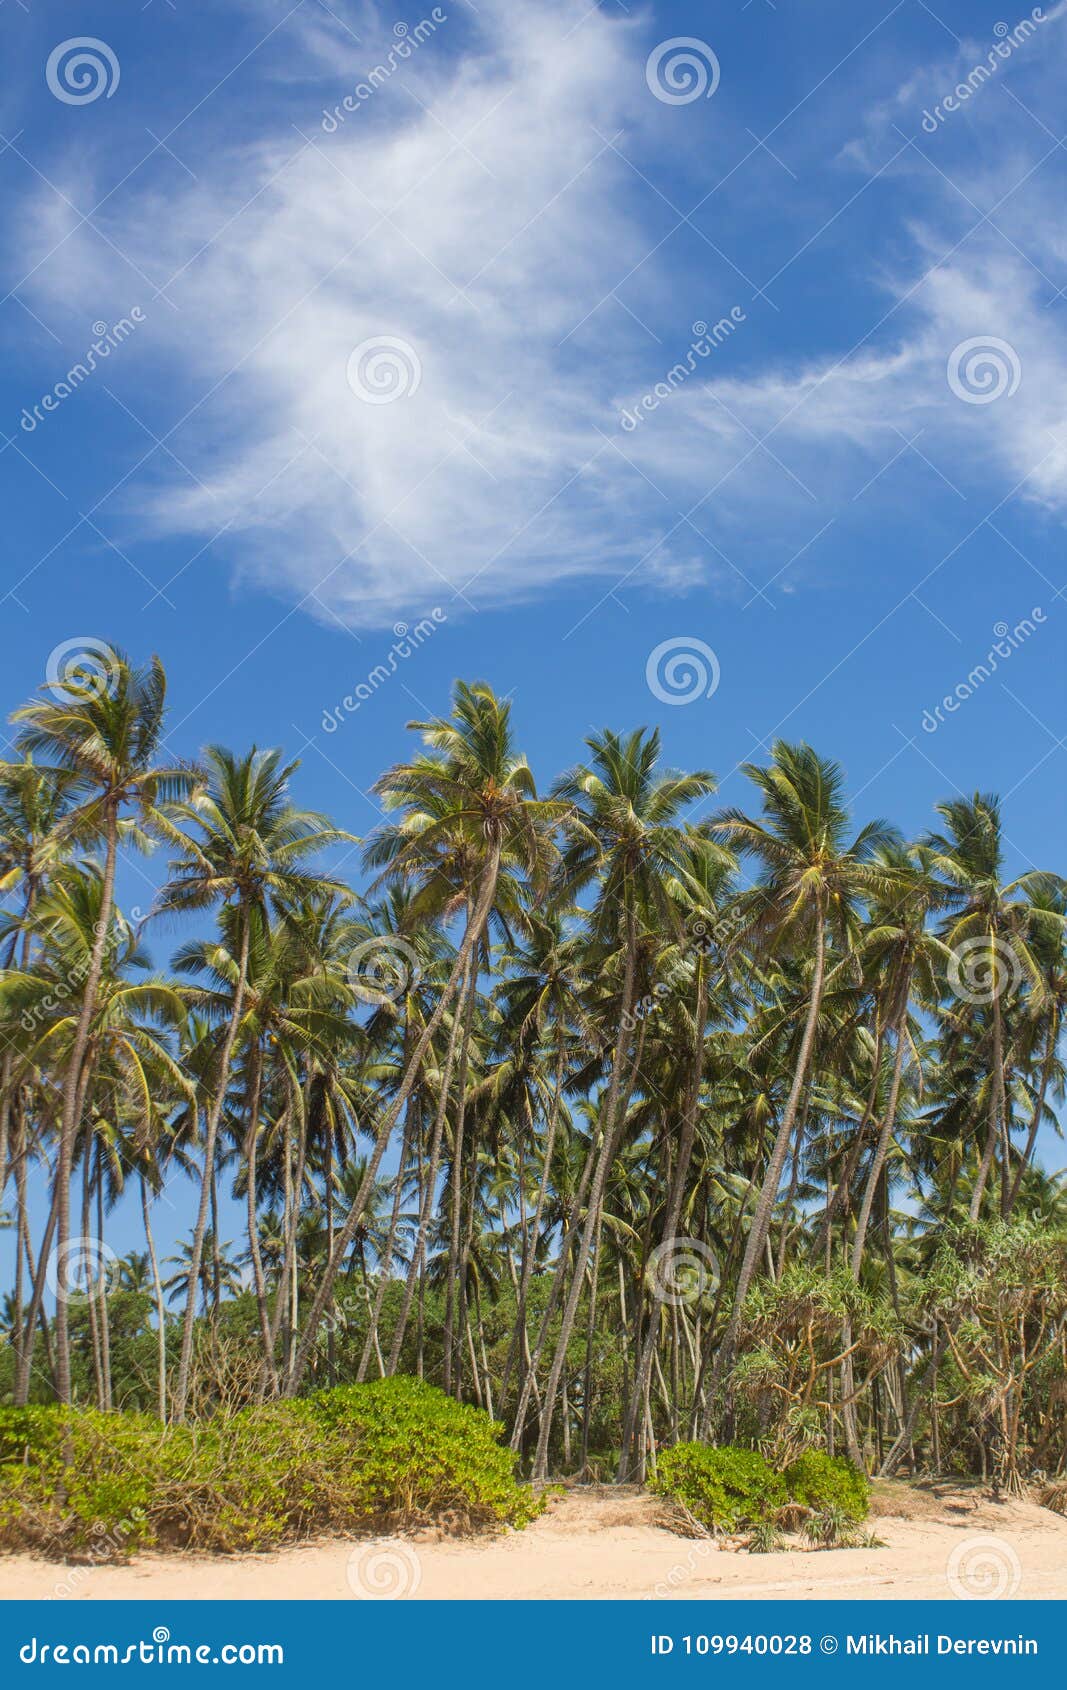 view of palm trees against the sky. island.